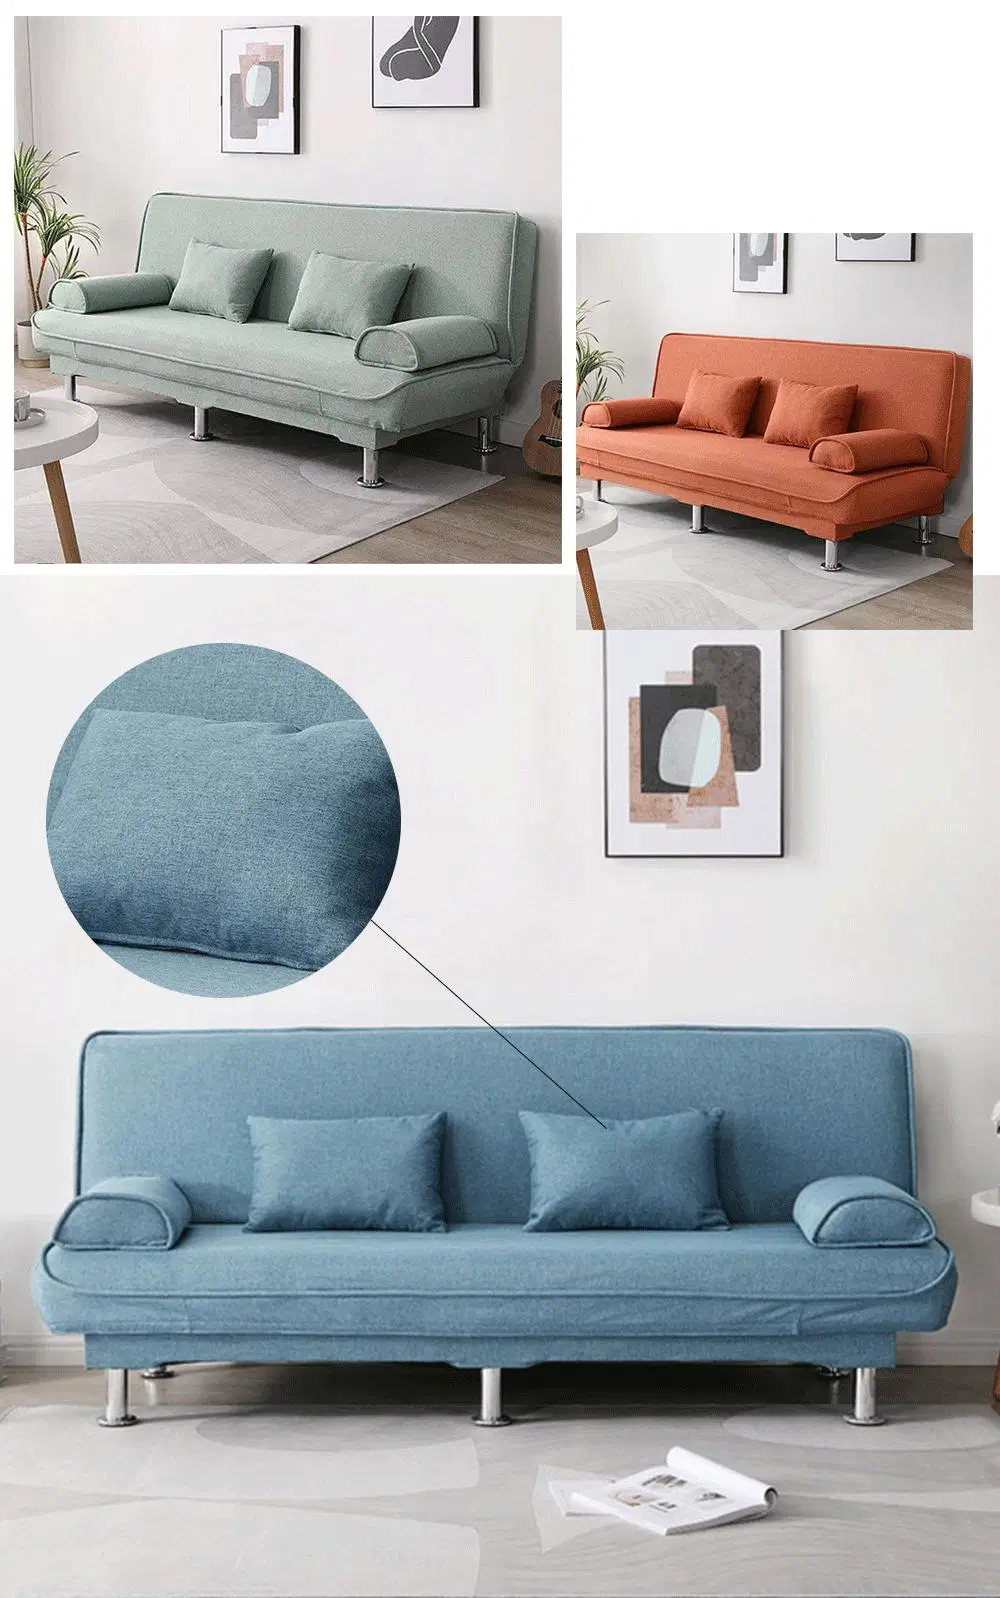 Recycle Chenille and Jacquard Polyester Sofa Office Furniture Fabric for Chair Home Textile